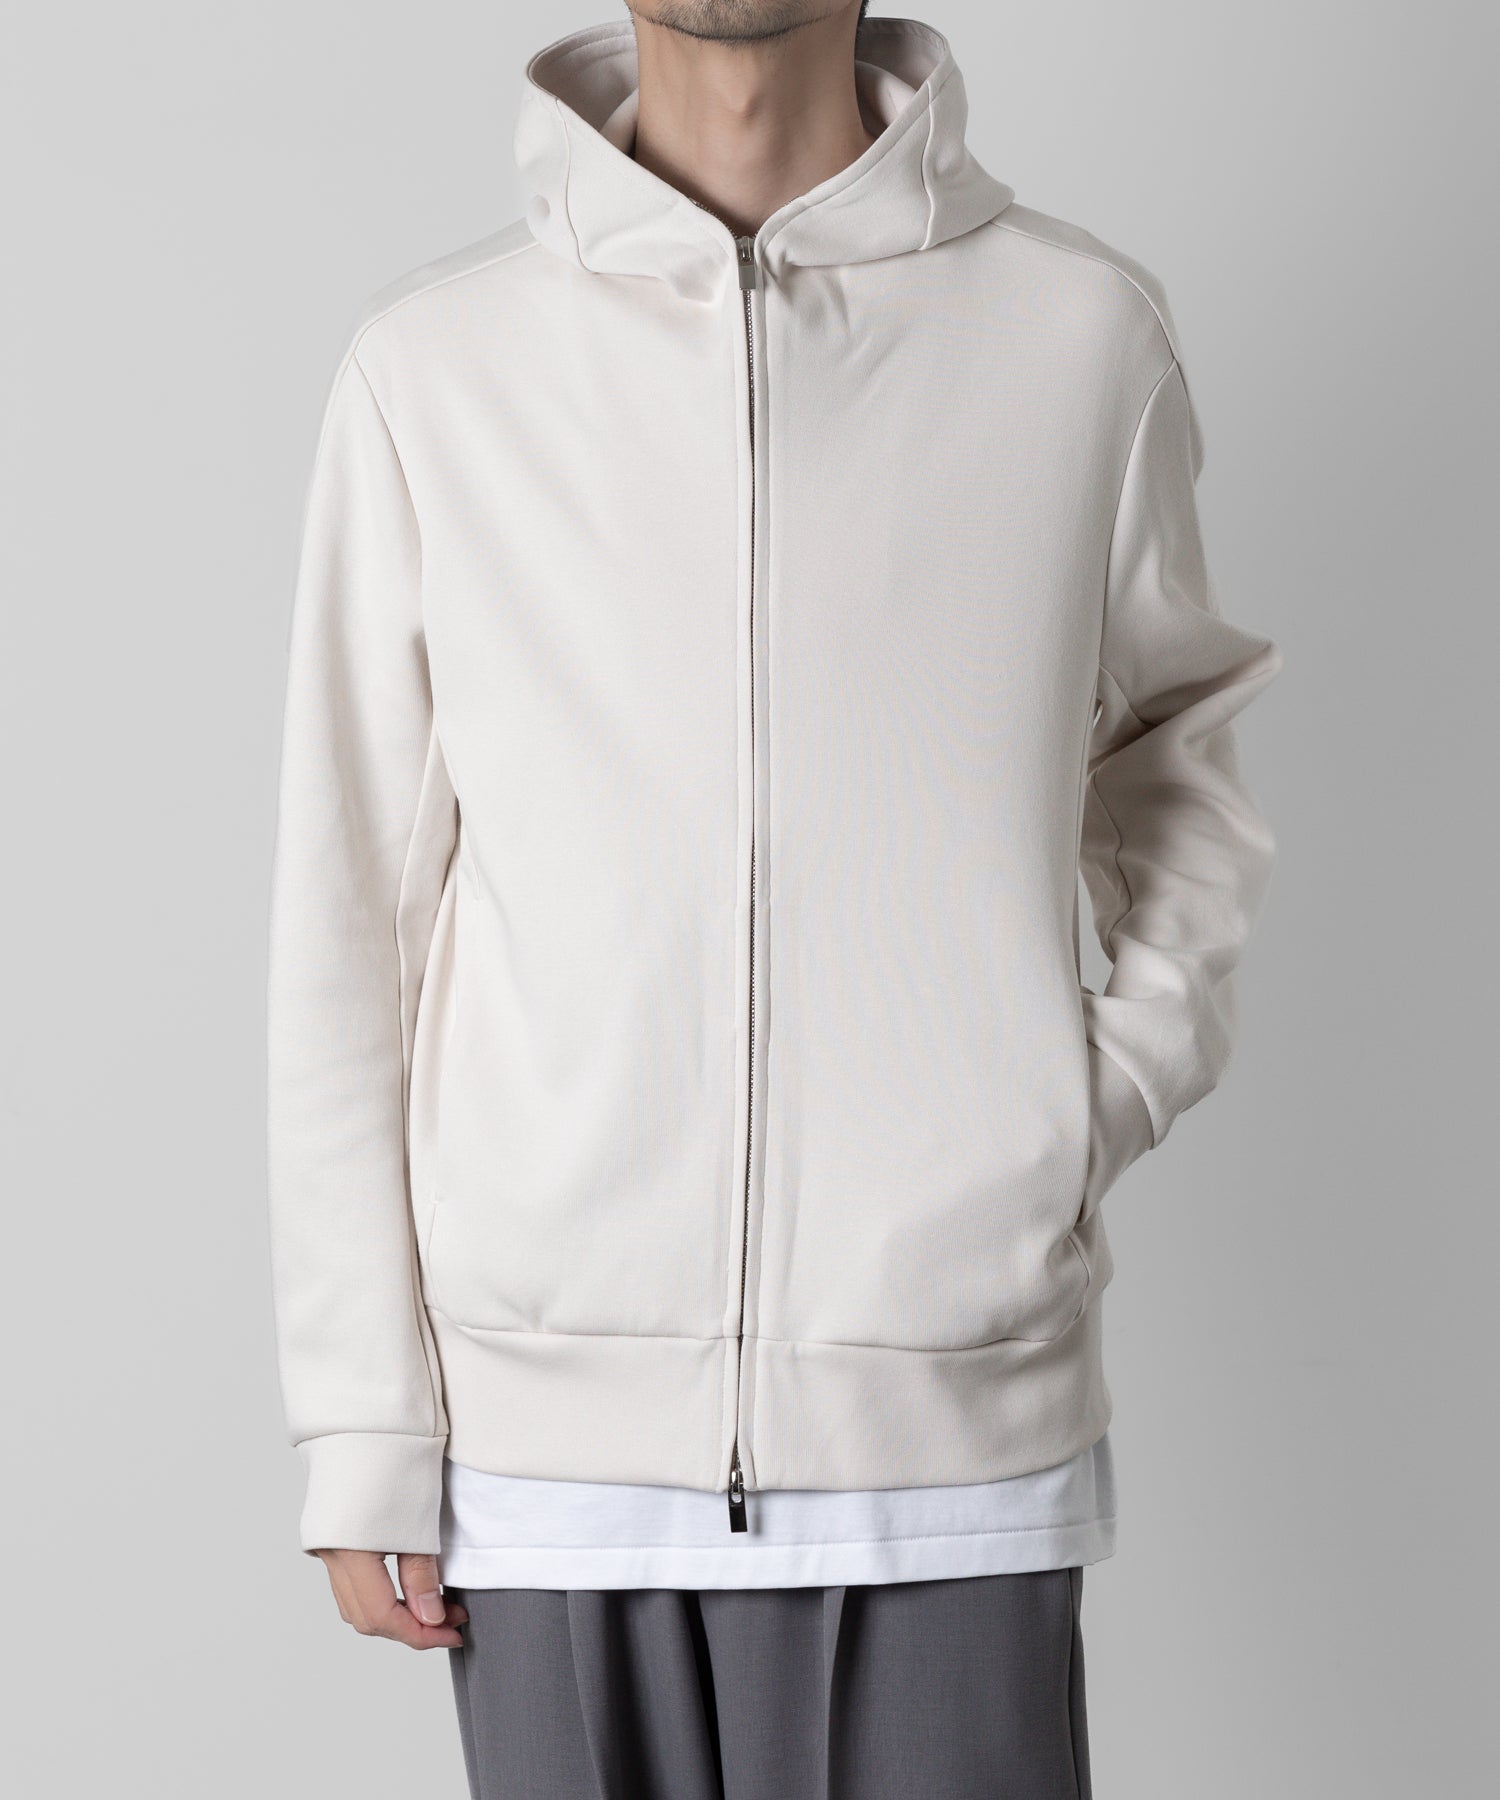 ATTACHMENT アタッチメント-LIMITED-のCO/PE DOUBLE FACE KNIT ZIP UP HOODIE - OFF WHITEの公式通販サイトsession福岡セレクトショップ